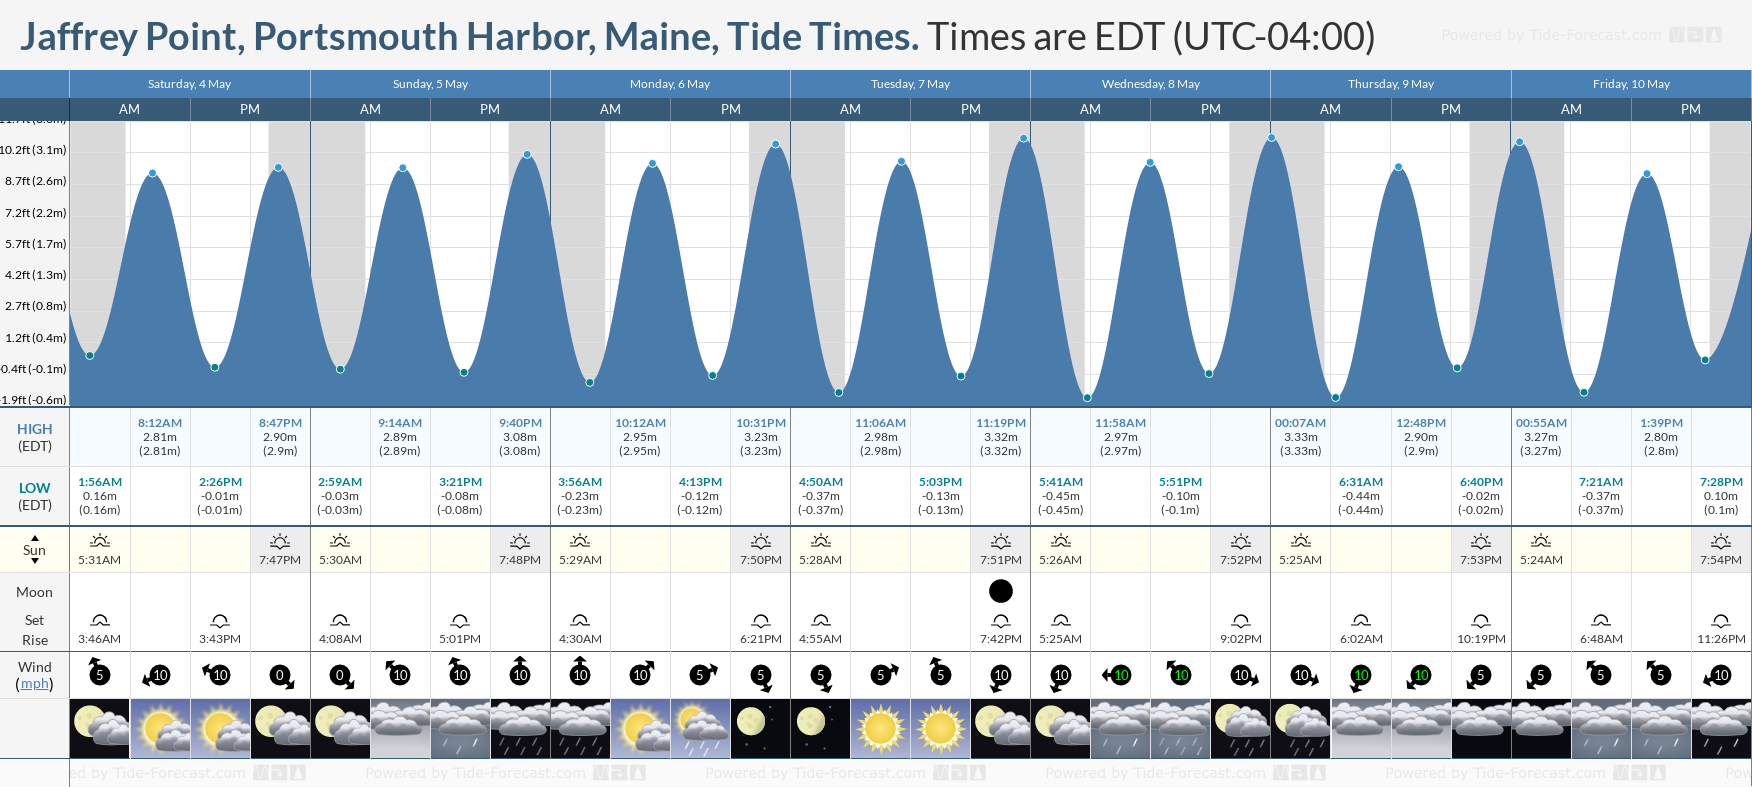 Jaffrey Point, Portsmouth Harbor, Maine Tide Chart including high and low tide tide times for the next 7 days